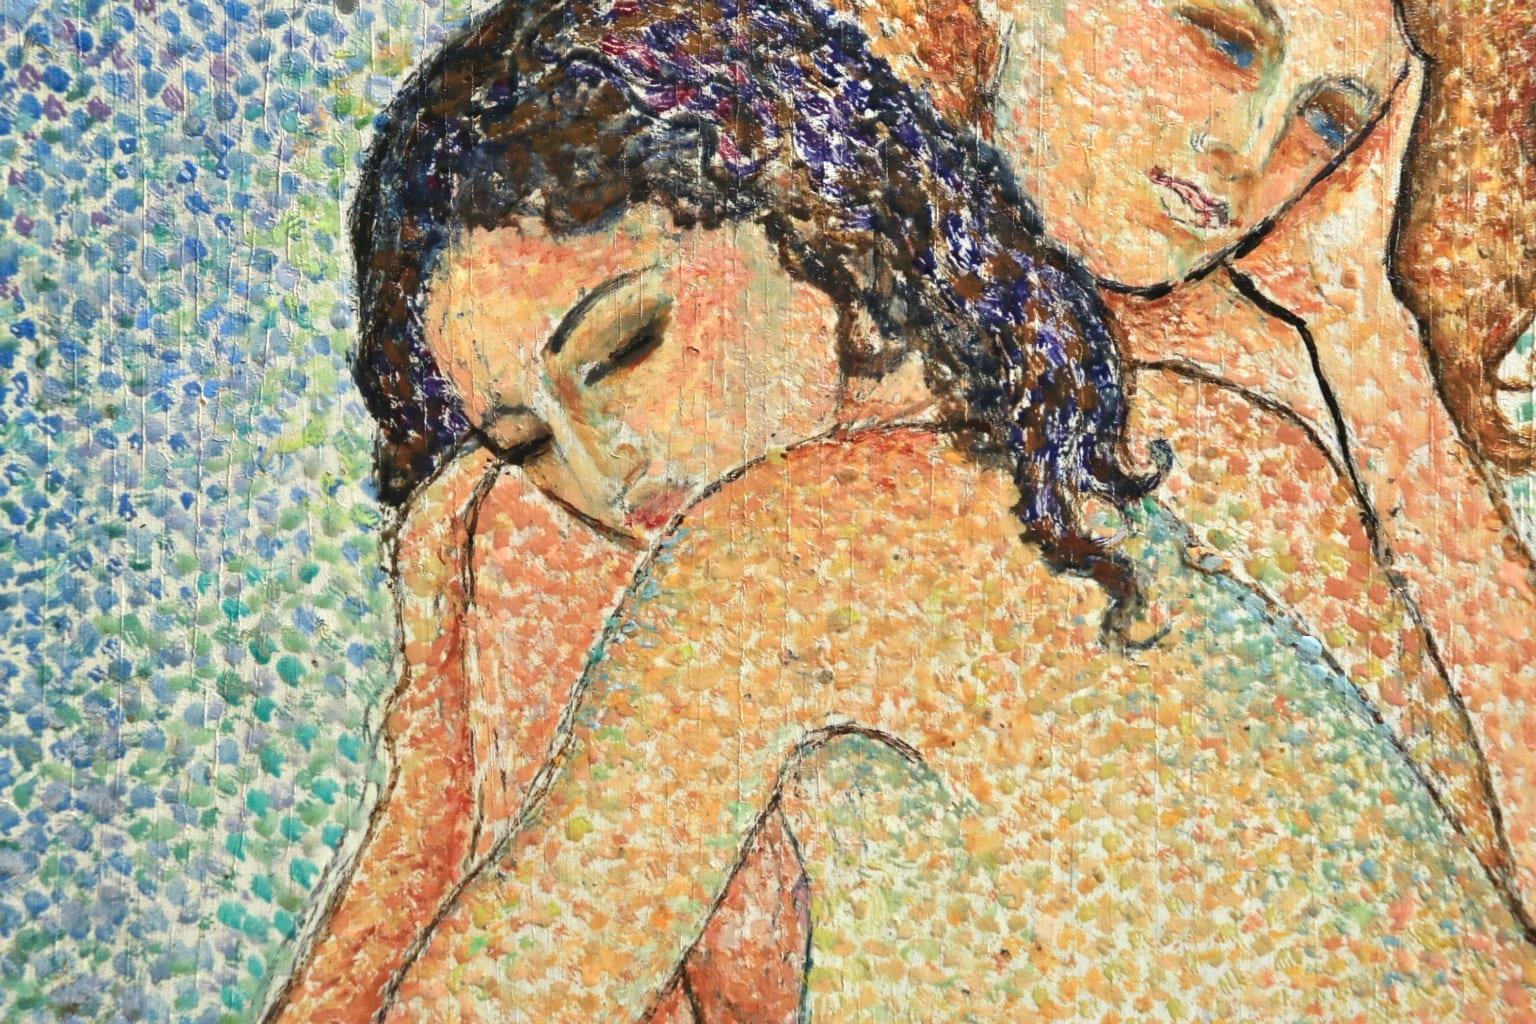 A beautiful pointillist oil on panel by Russian painter Marie Vorobieff Marevna depicting two nude young women - one redhead with a blue blanket wrapped round her waist and one brunette with a red blanket wrapped round her waist. The women are